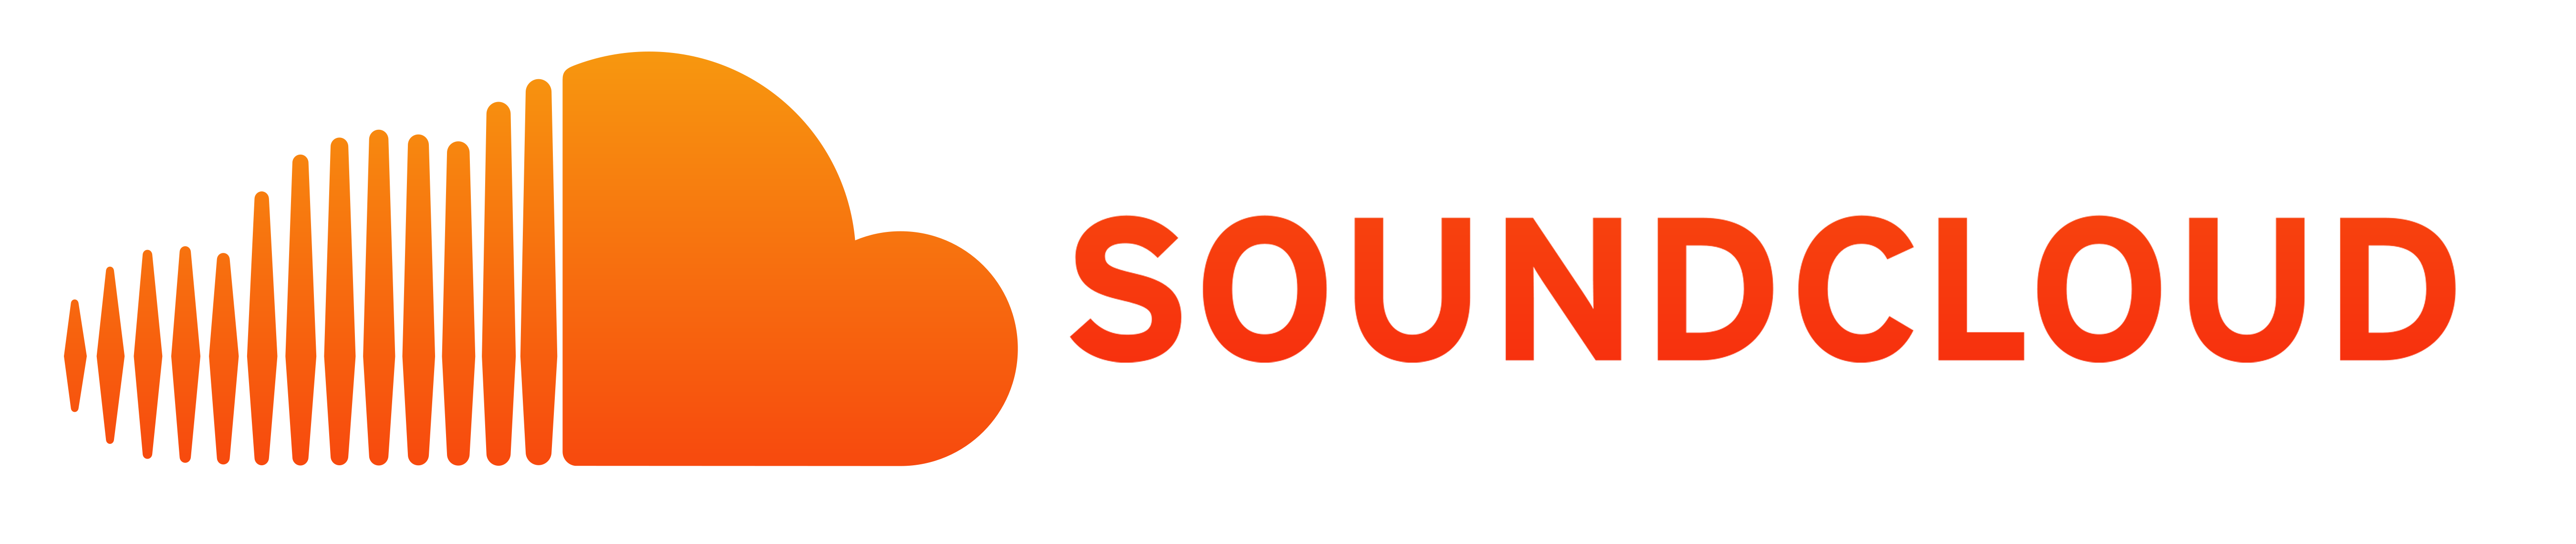 Listen to new sounds on the go with Soundcloud